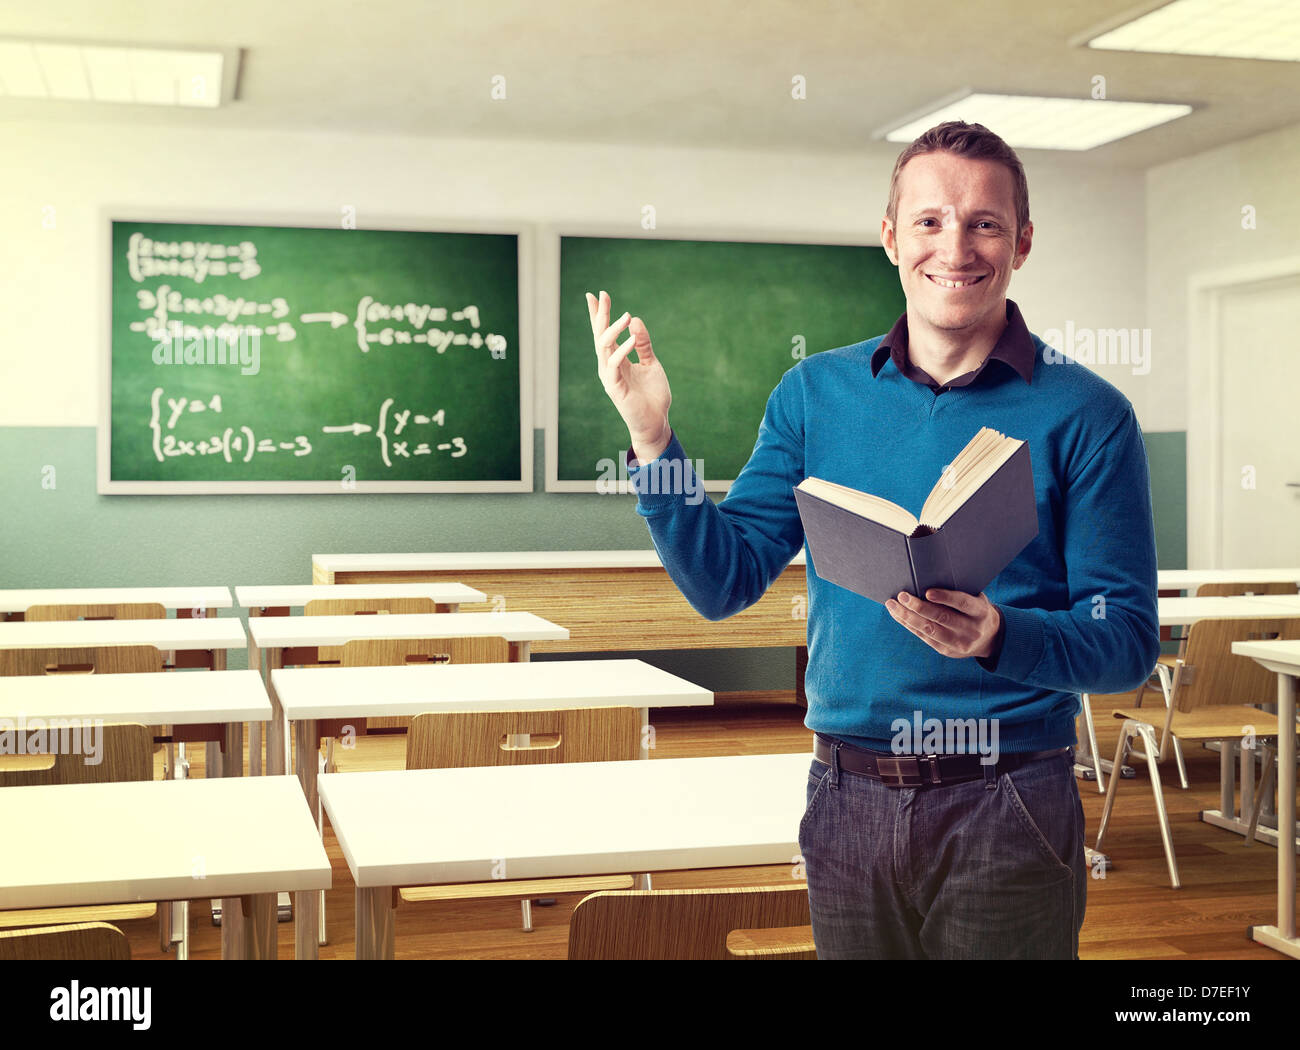 smiling teacher and class background Stock Photo - Alamy